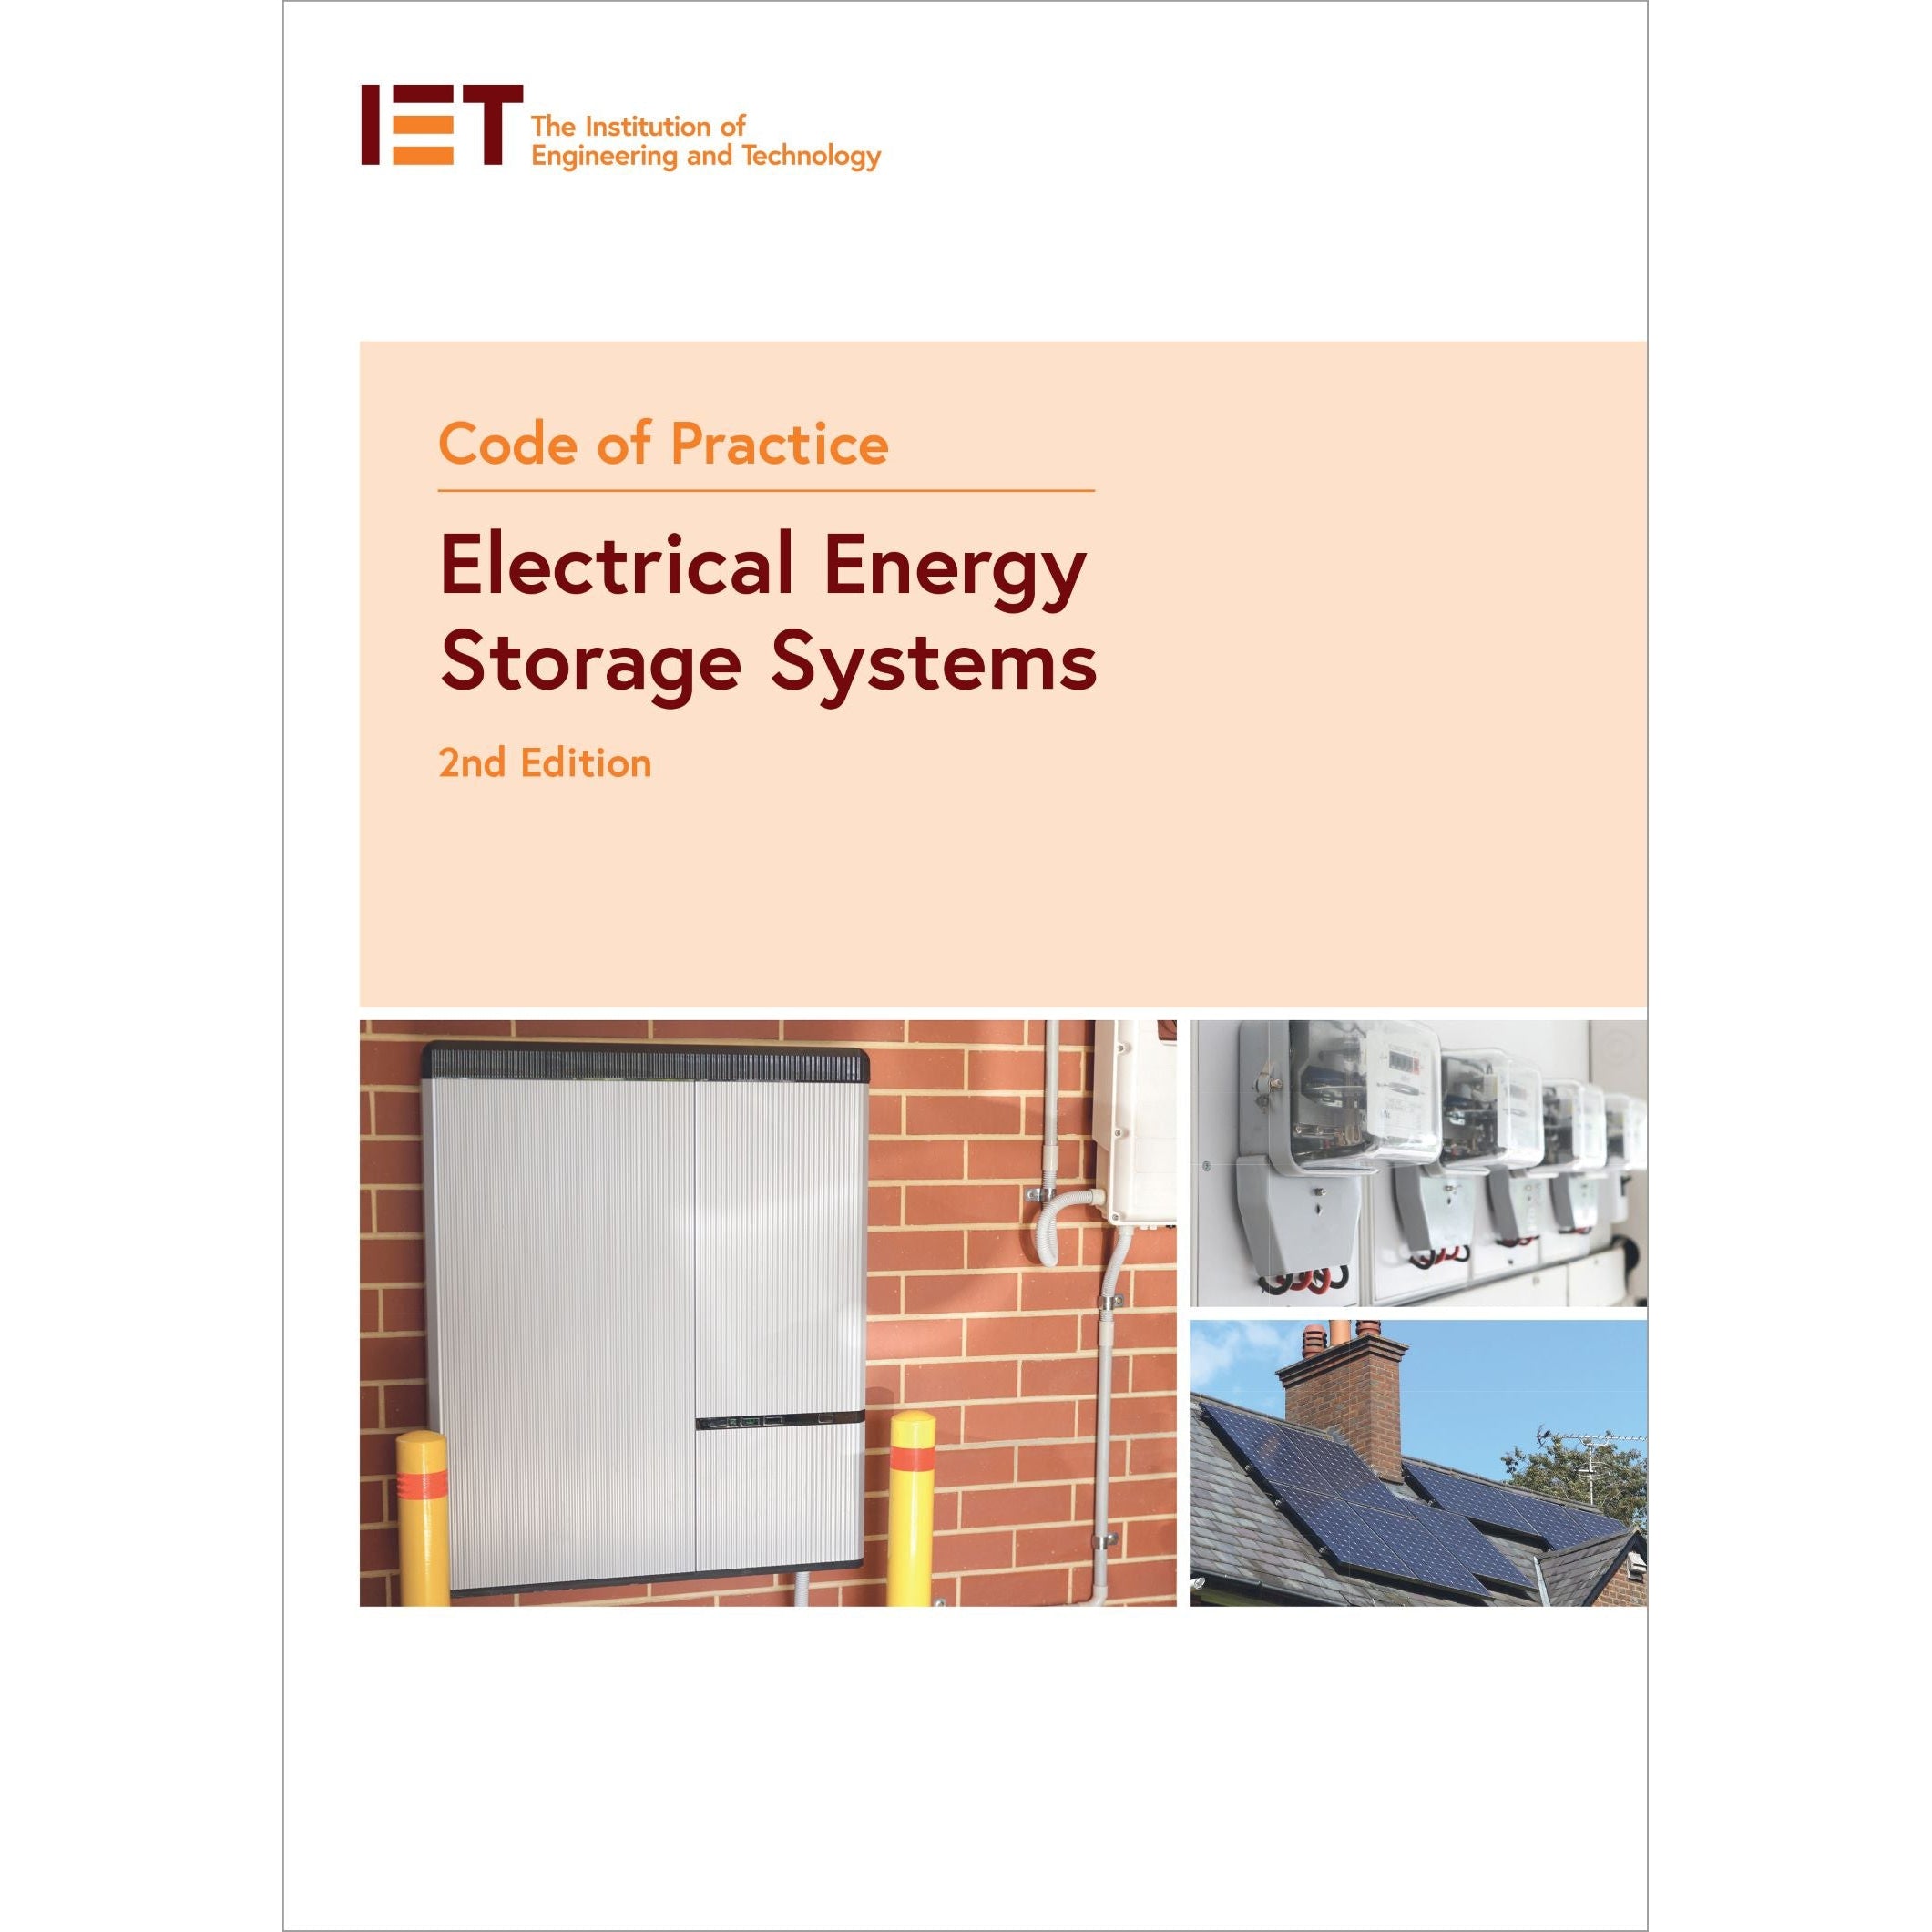 IET CODE OF PRACTICE ENERGY STORAGE SYSTEMS